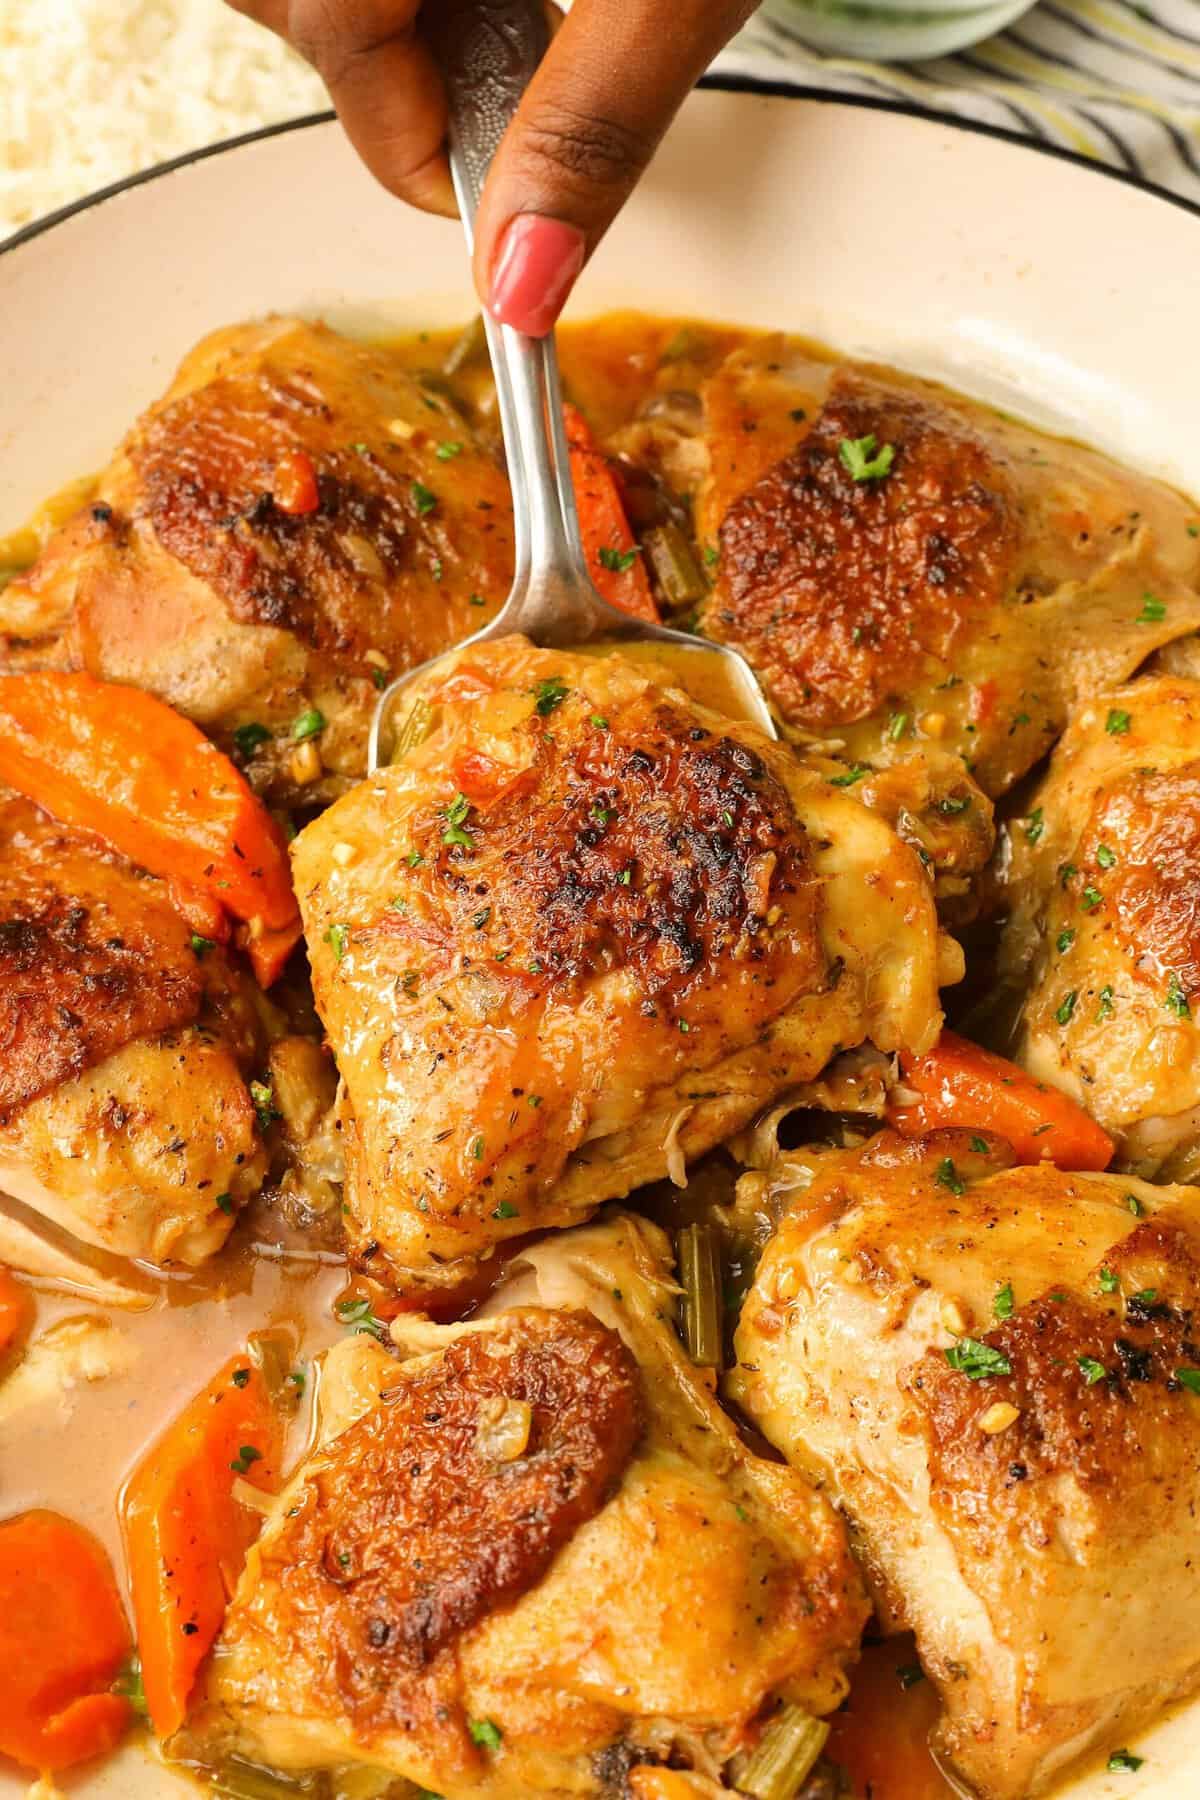 Serving up fresh from the oven Braised Chicken Thighs for a healthy dinner